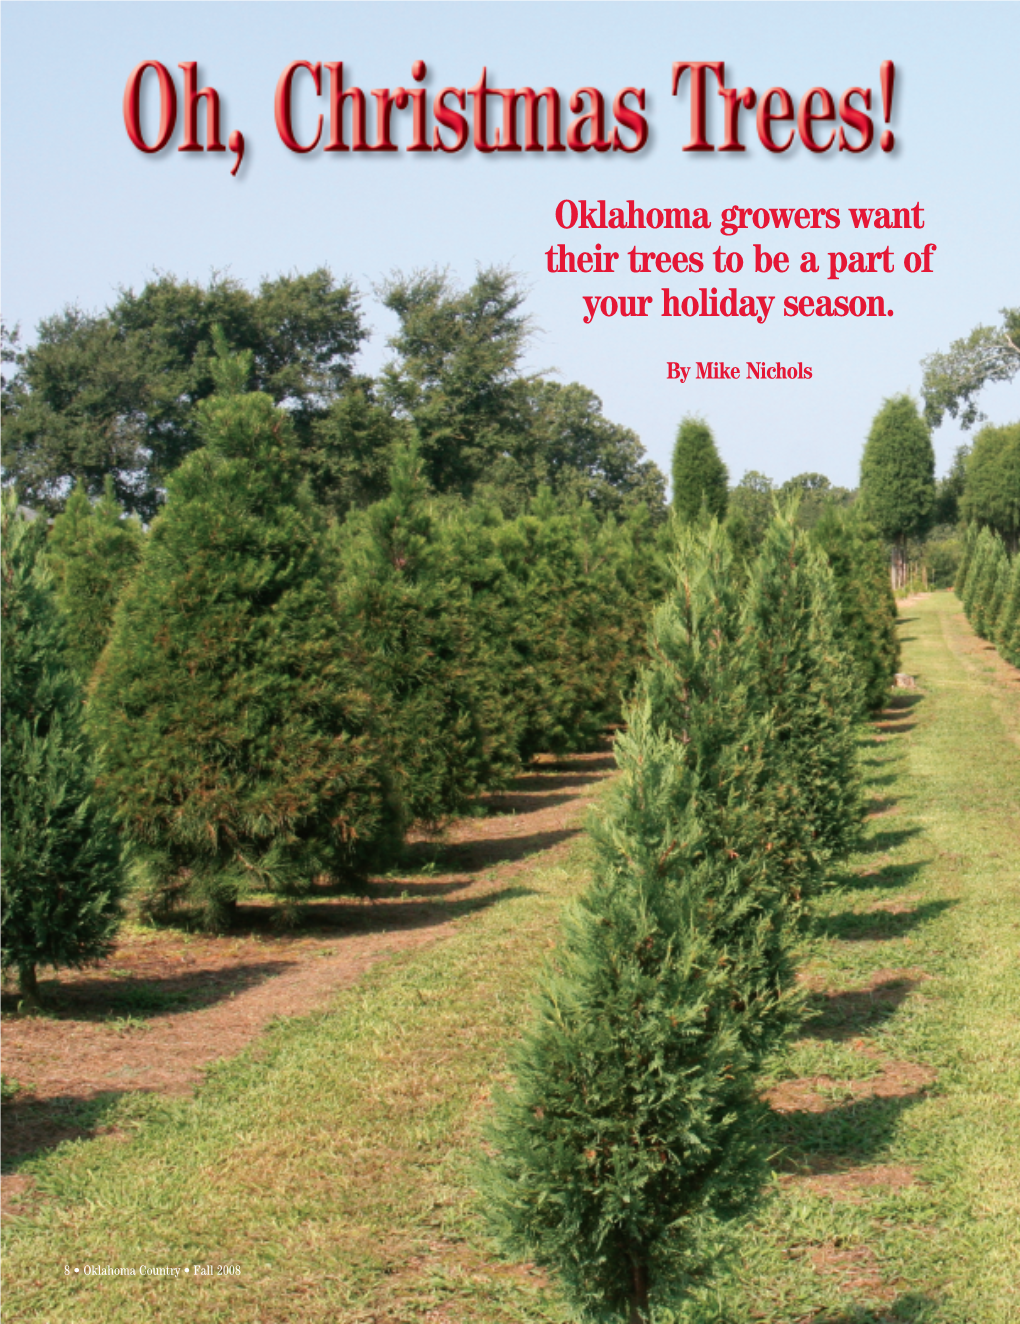 Oklahoma Growers Want Their Trees to Be a Part of Your Holiday Season